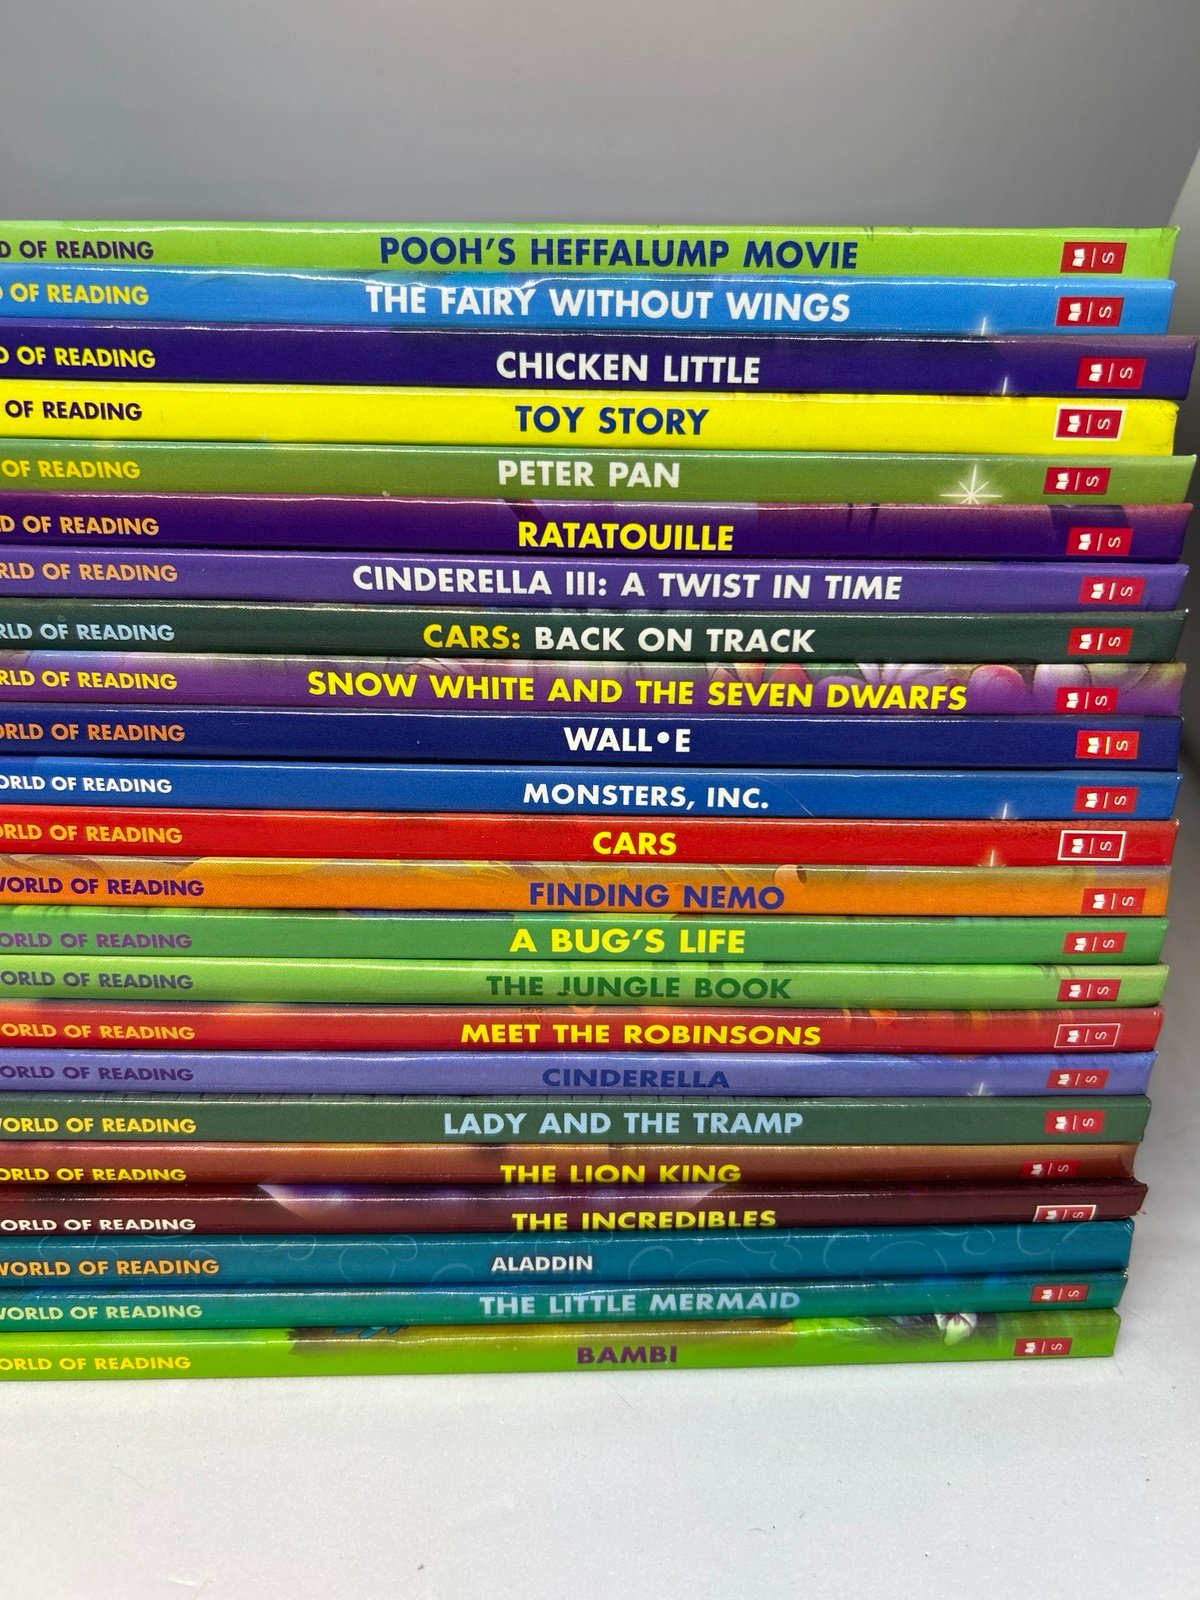 Disney wonderful world of reading lot of 23 books 92an5s5Ng